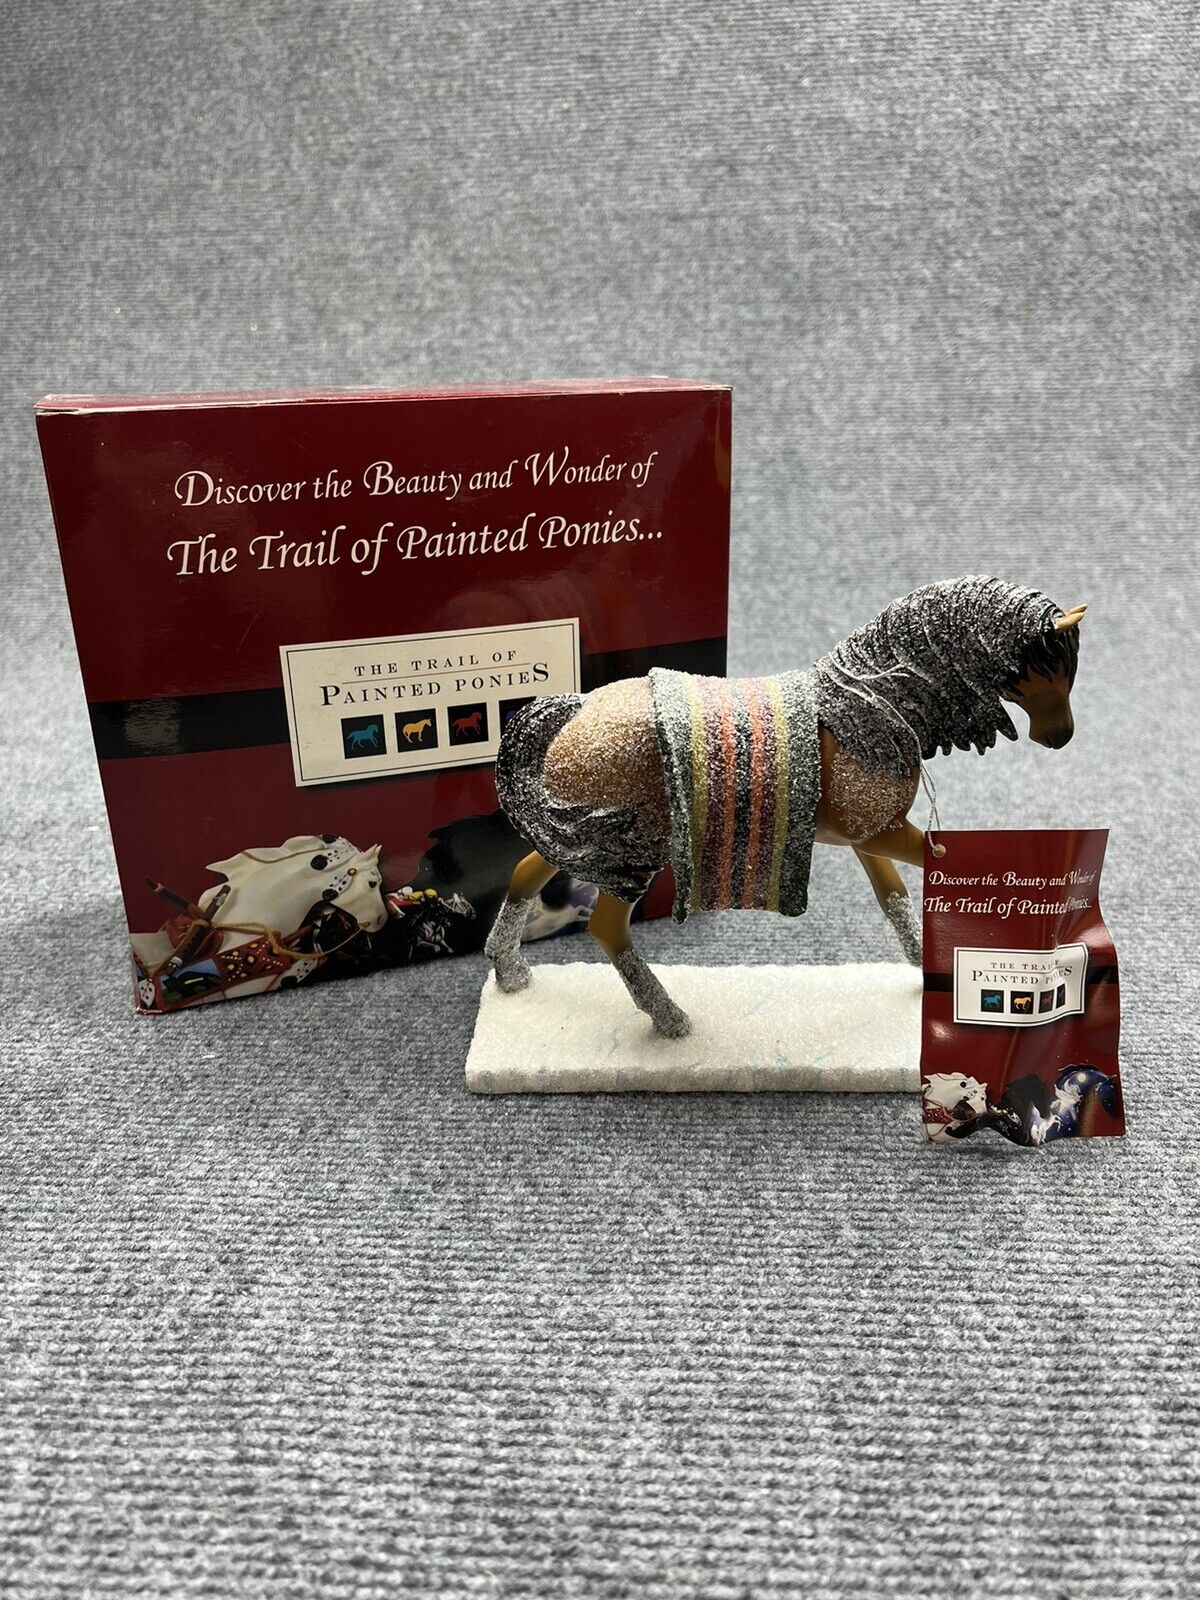 Painted Ponies Wounded Knee Pony NIB 2008 Item 12276 1E/3,685